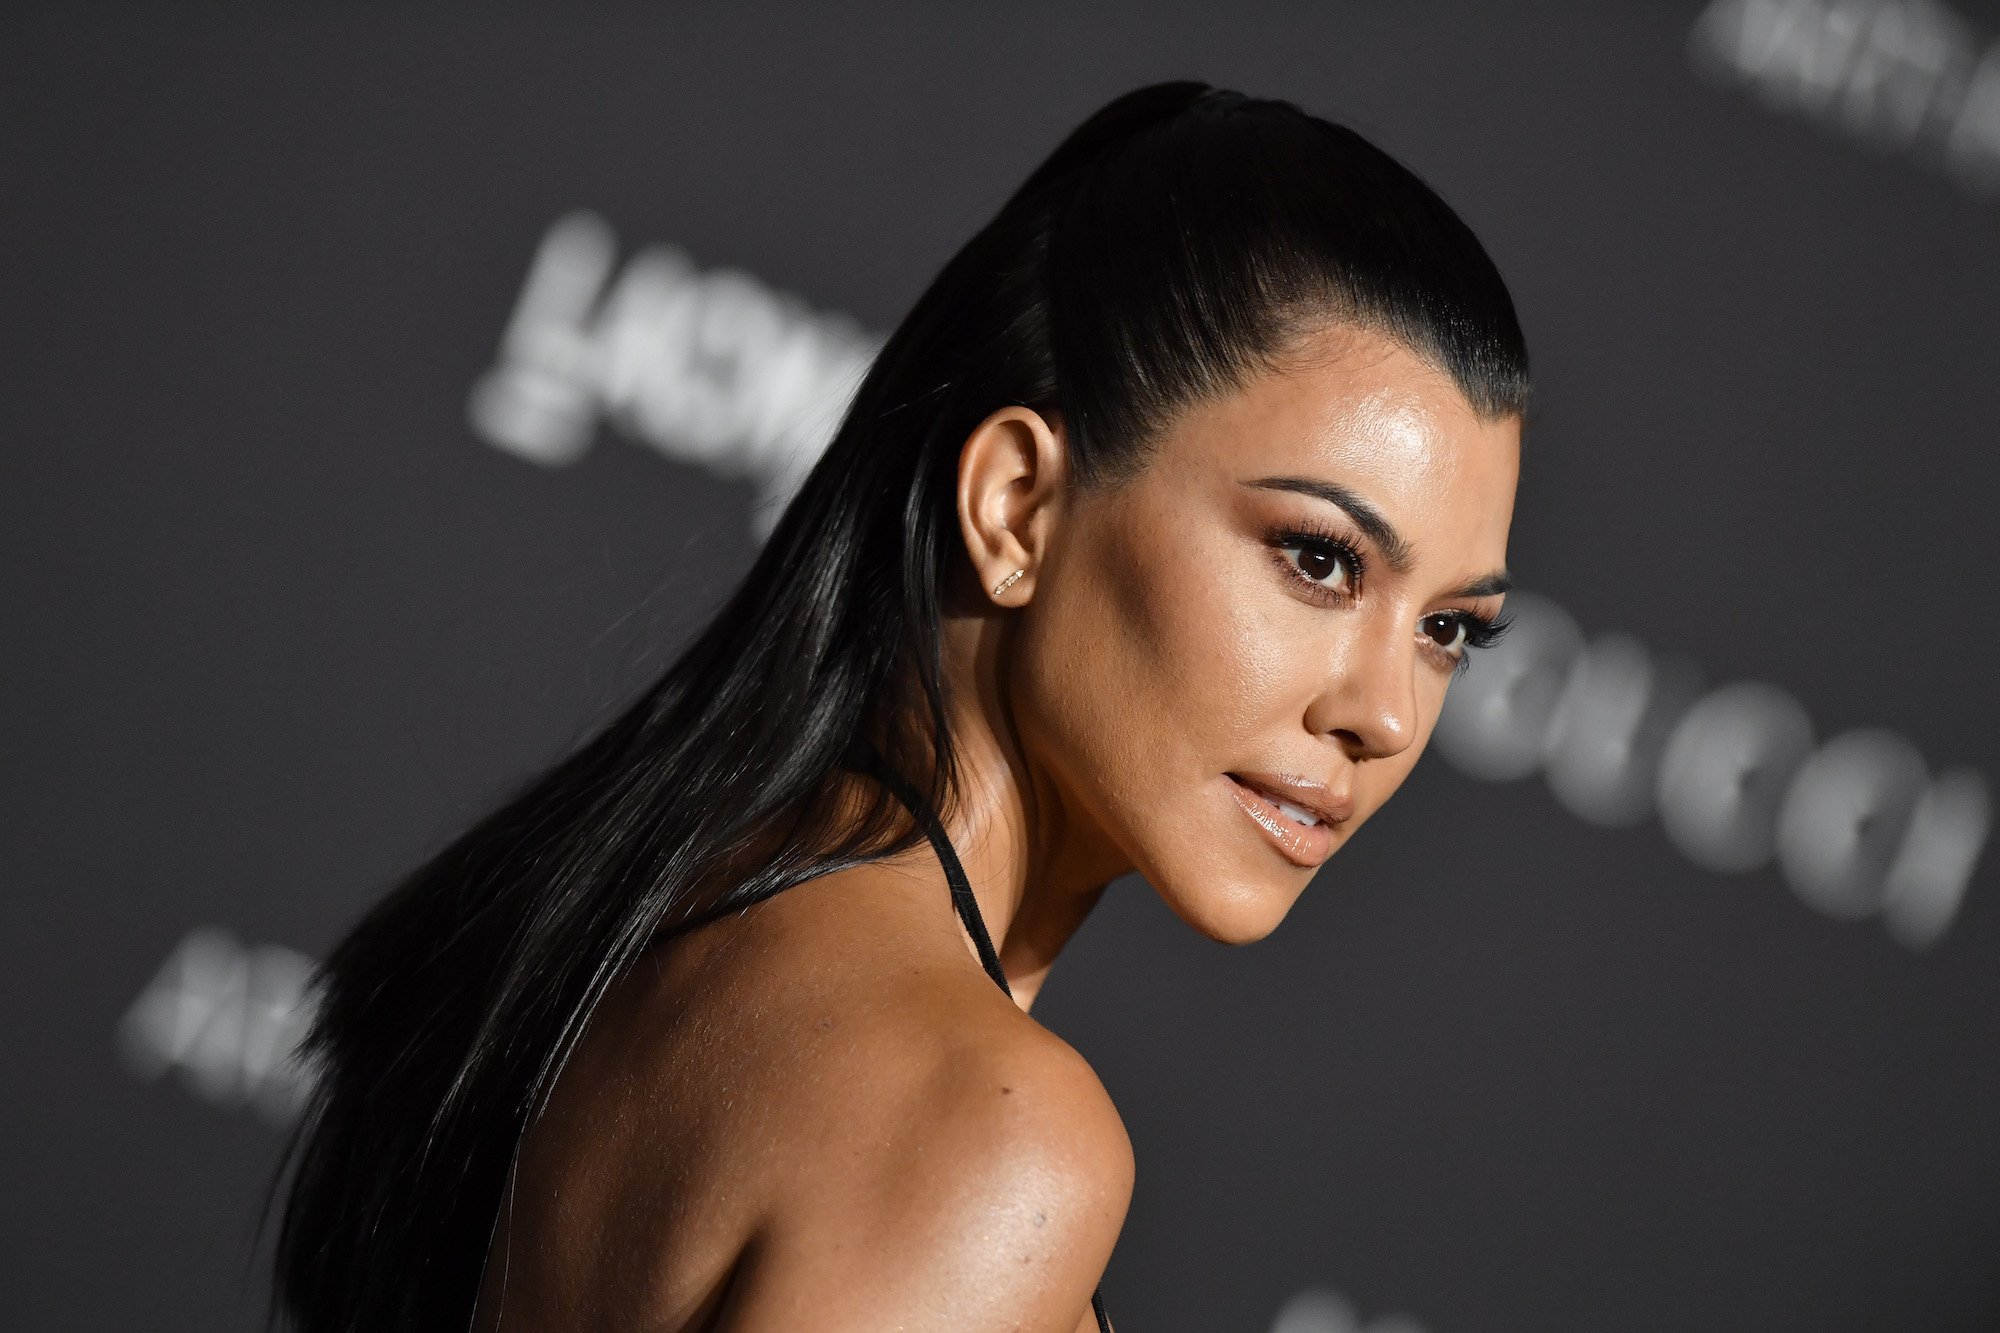 Kourtney Kardashian Shouldn’t Call the Show That Made Her Rich and Famous ‘Toxic’